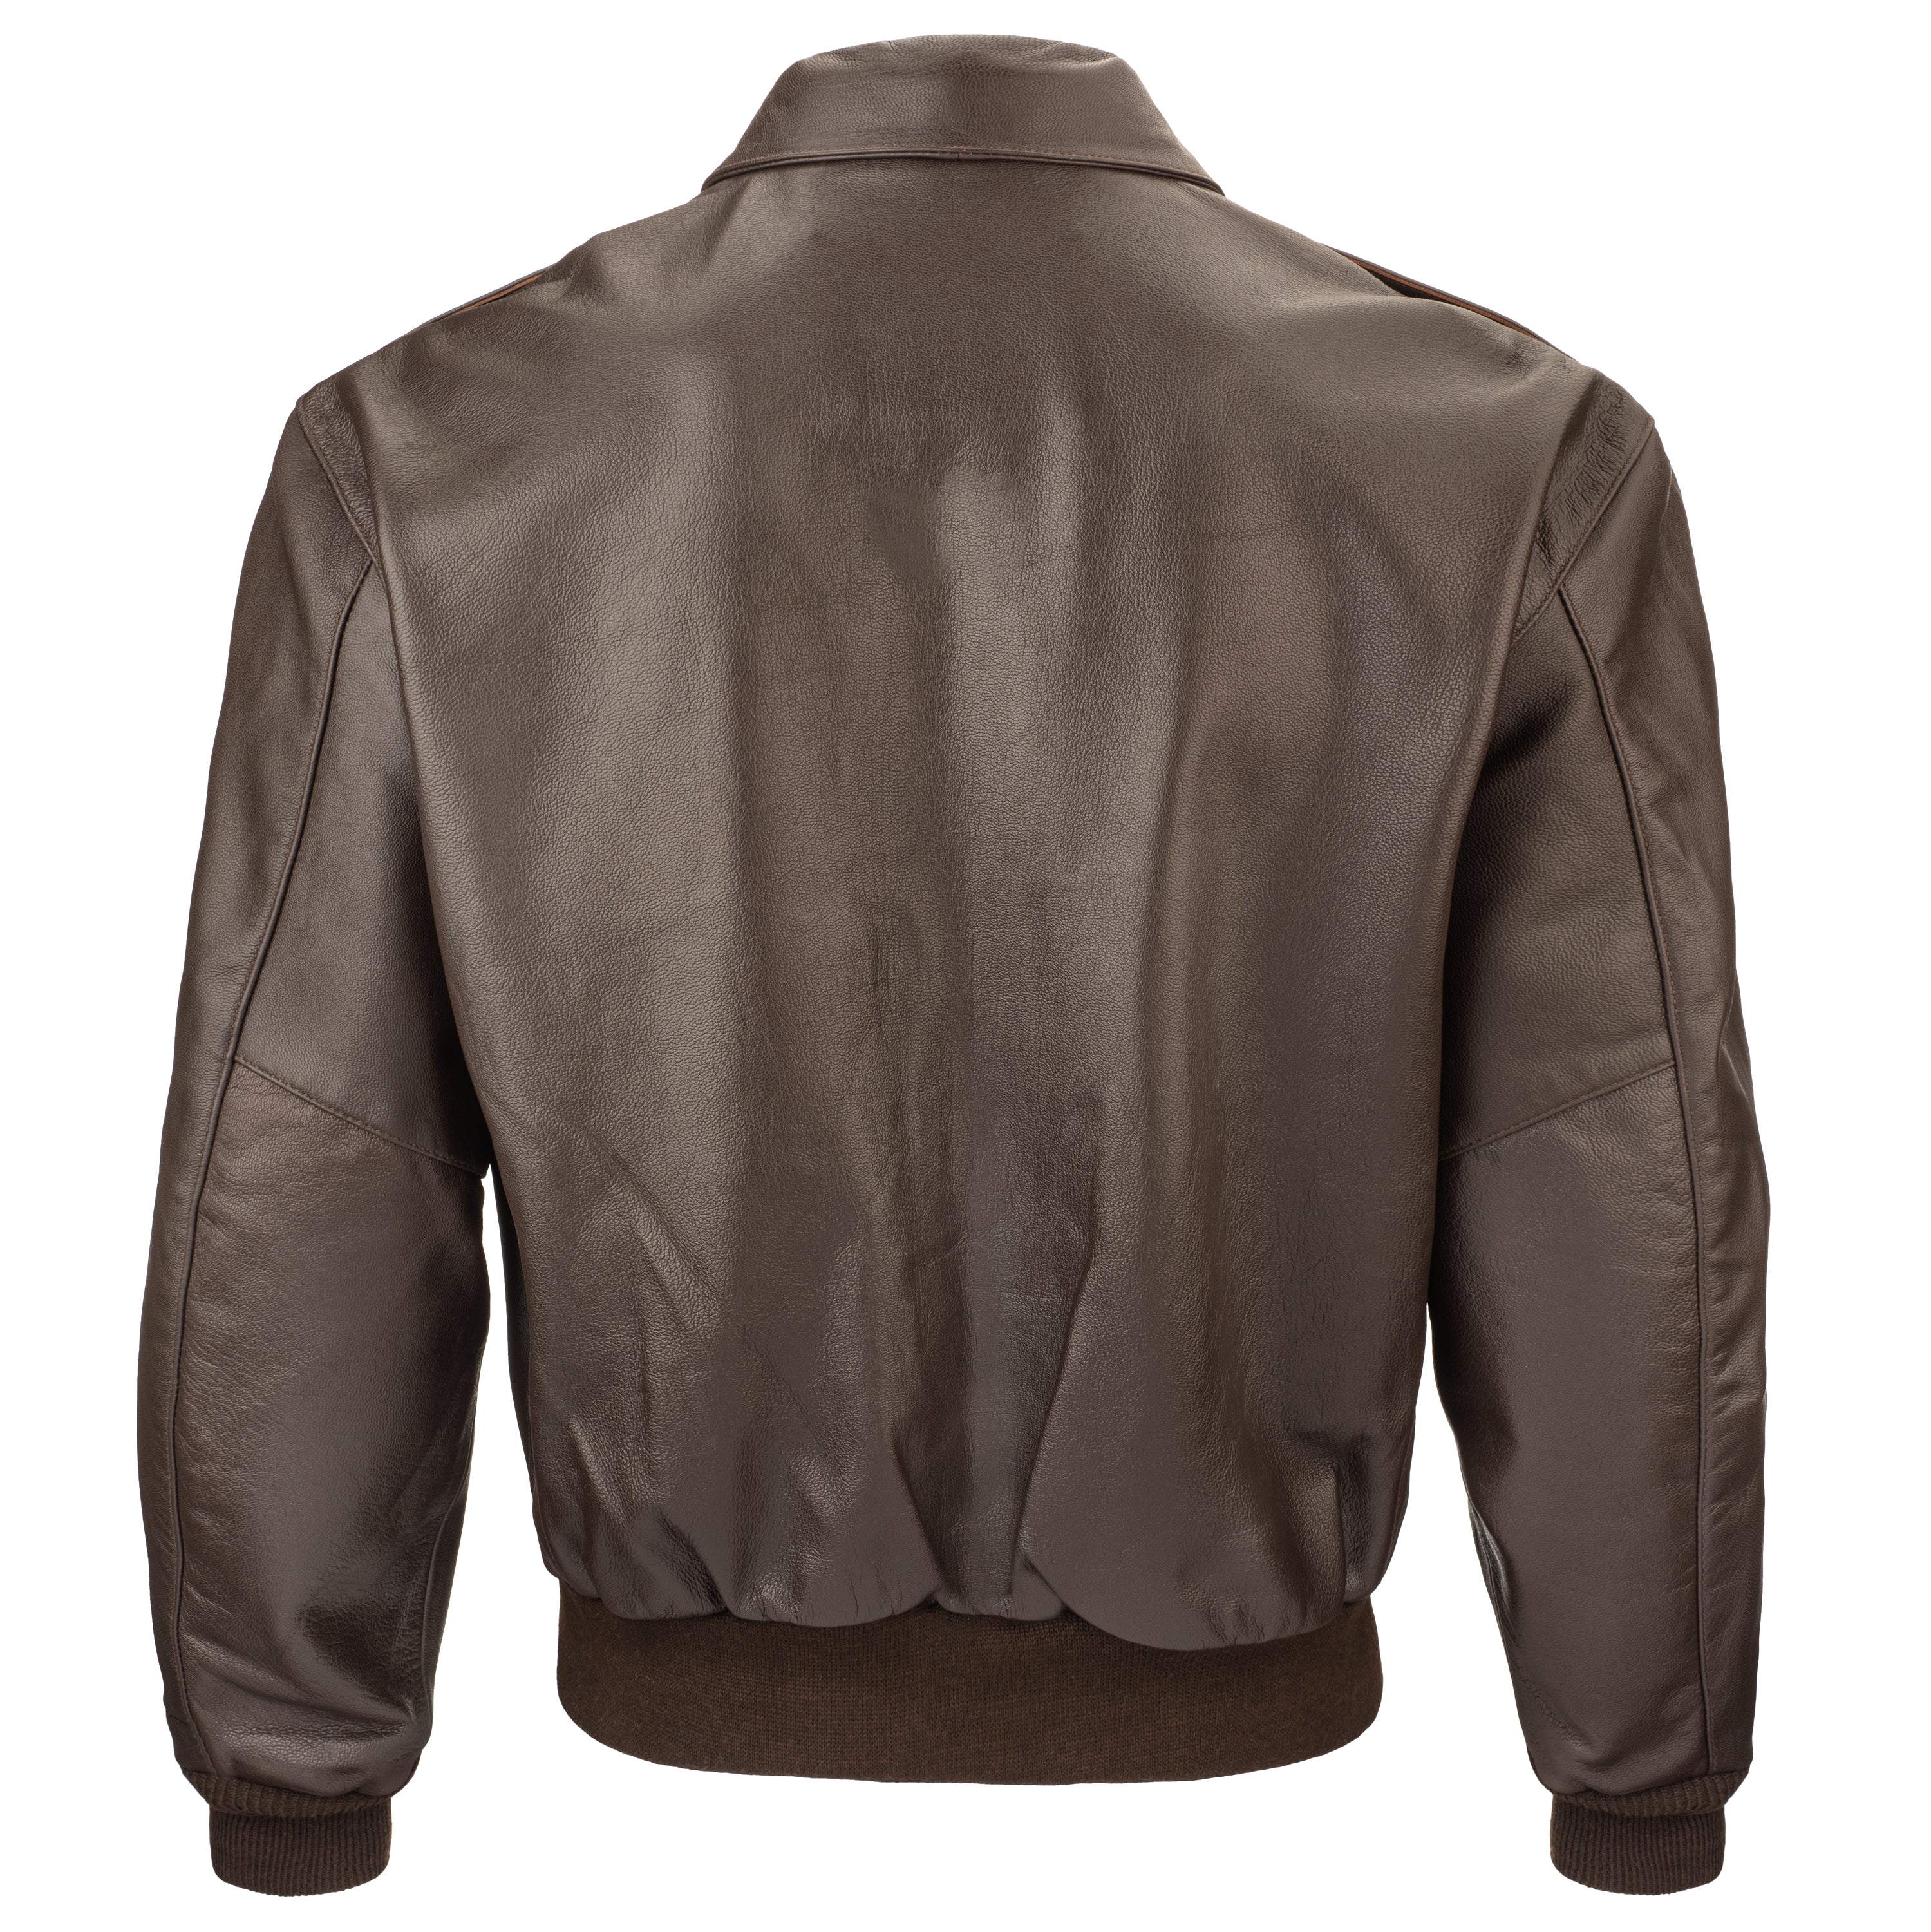 Ban Neck Collar Men's Leather Jacket Classic Dark Brown Color Front Zi